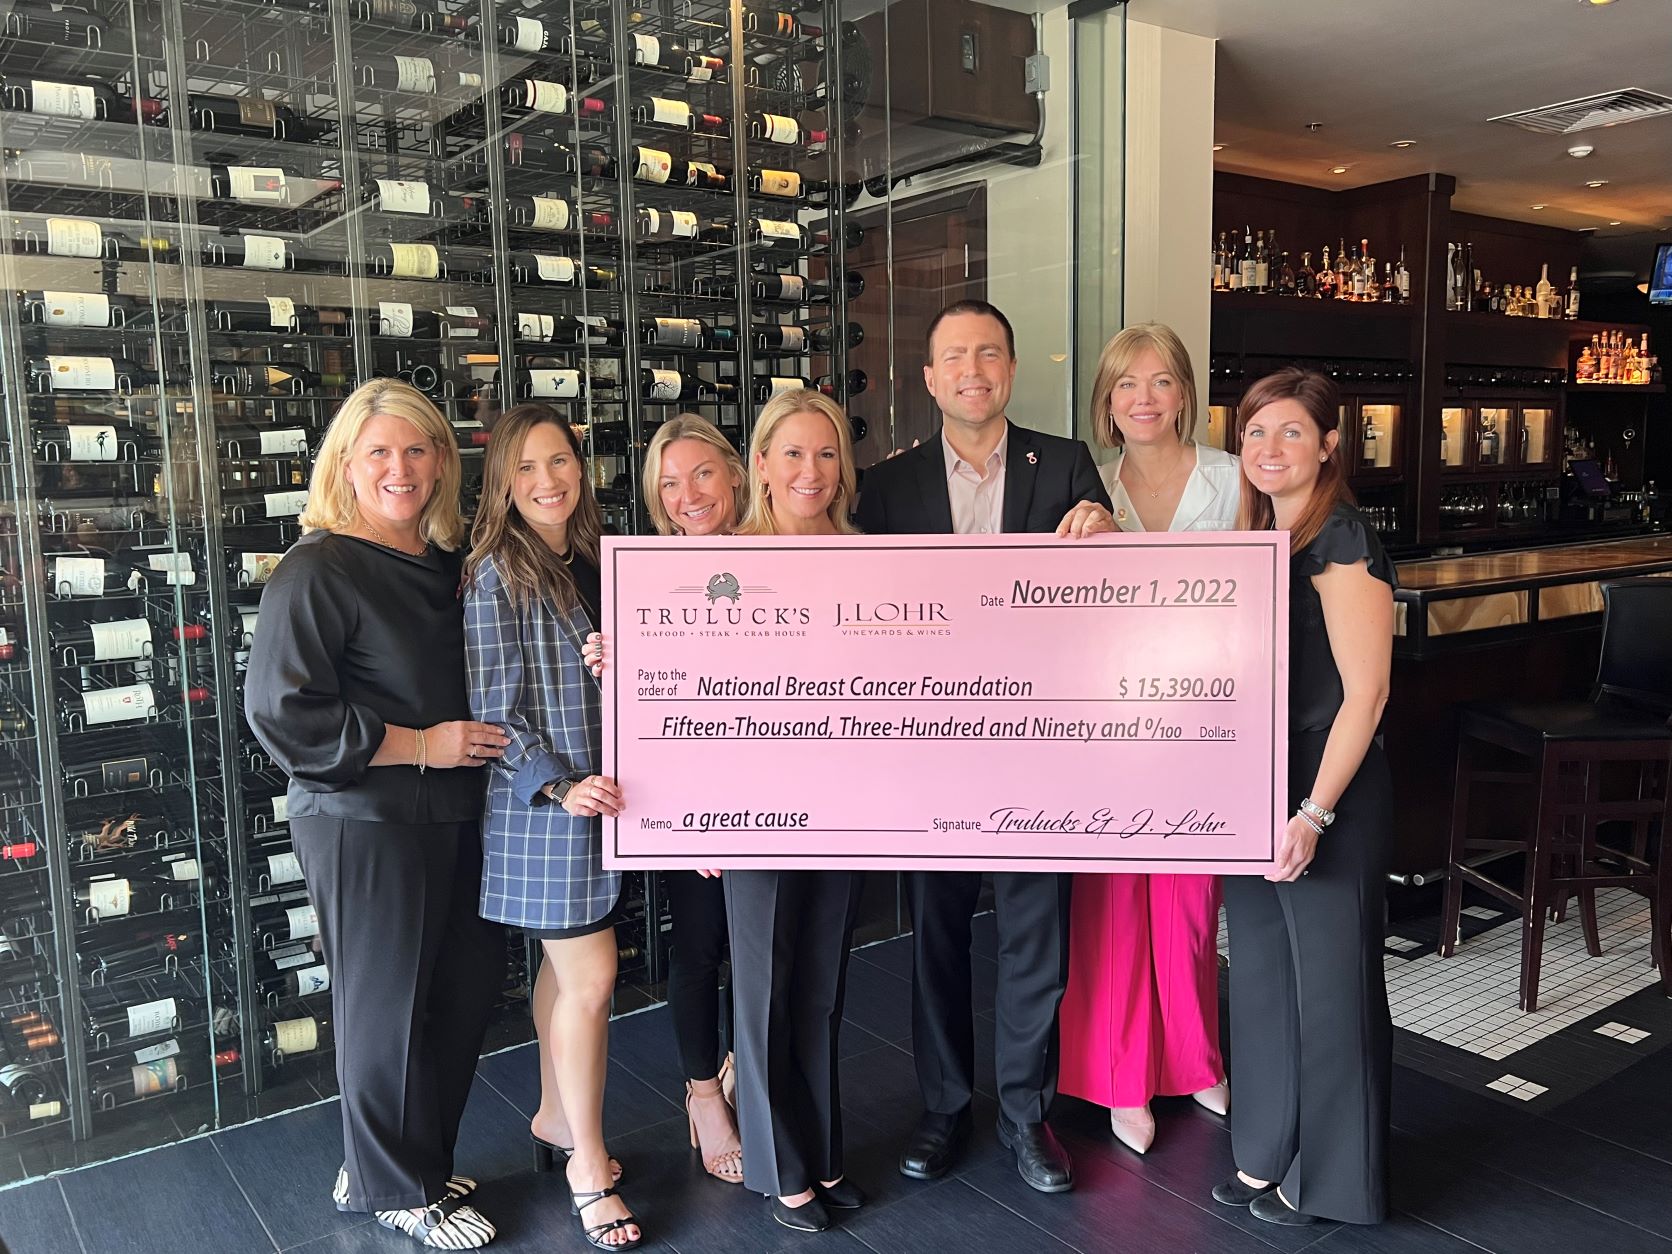 photo of the J. Lohr team and Dave Mattern with a 'big check' in the amount of $15,390 for National Breast Cancer Foundation